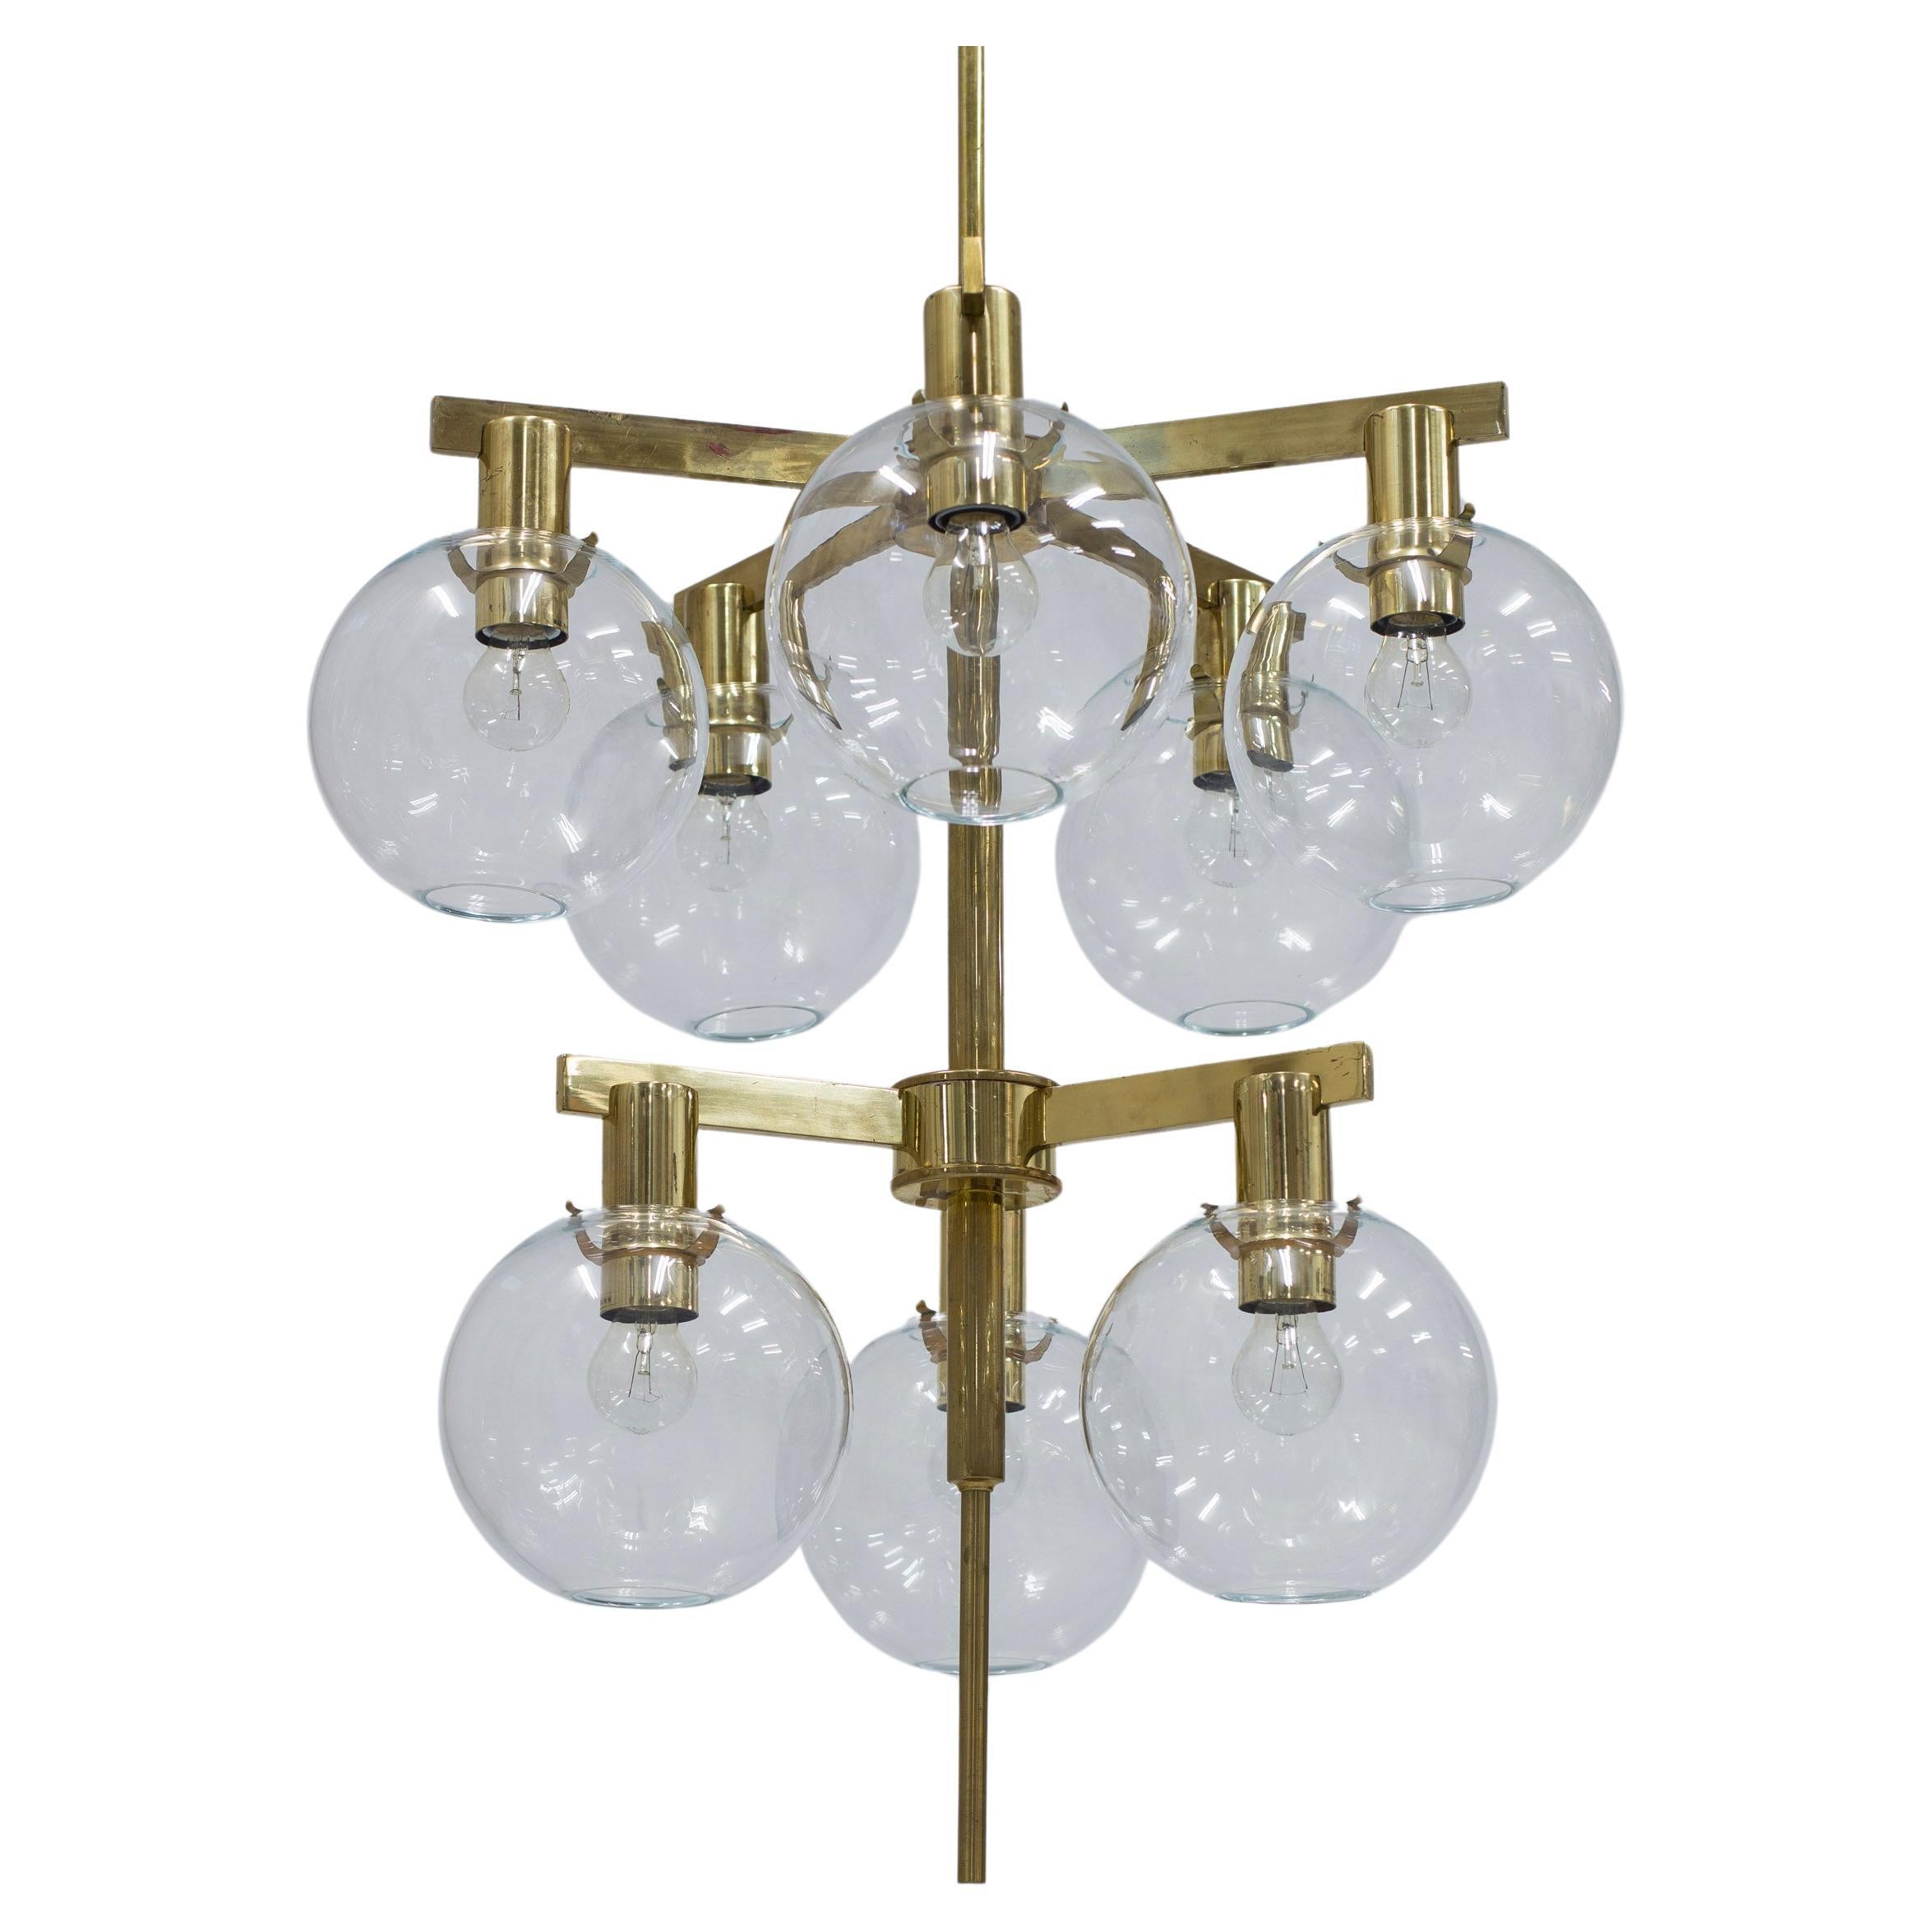 Glass and brass chandelier "Pastoral" by Hans-Agne Jakobsson, sweden, 1950s For Sale